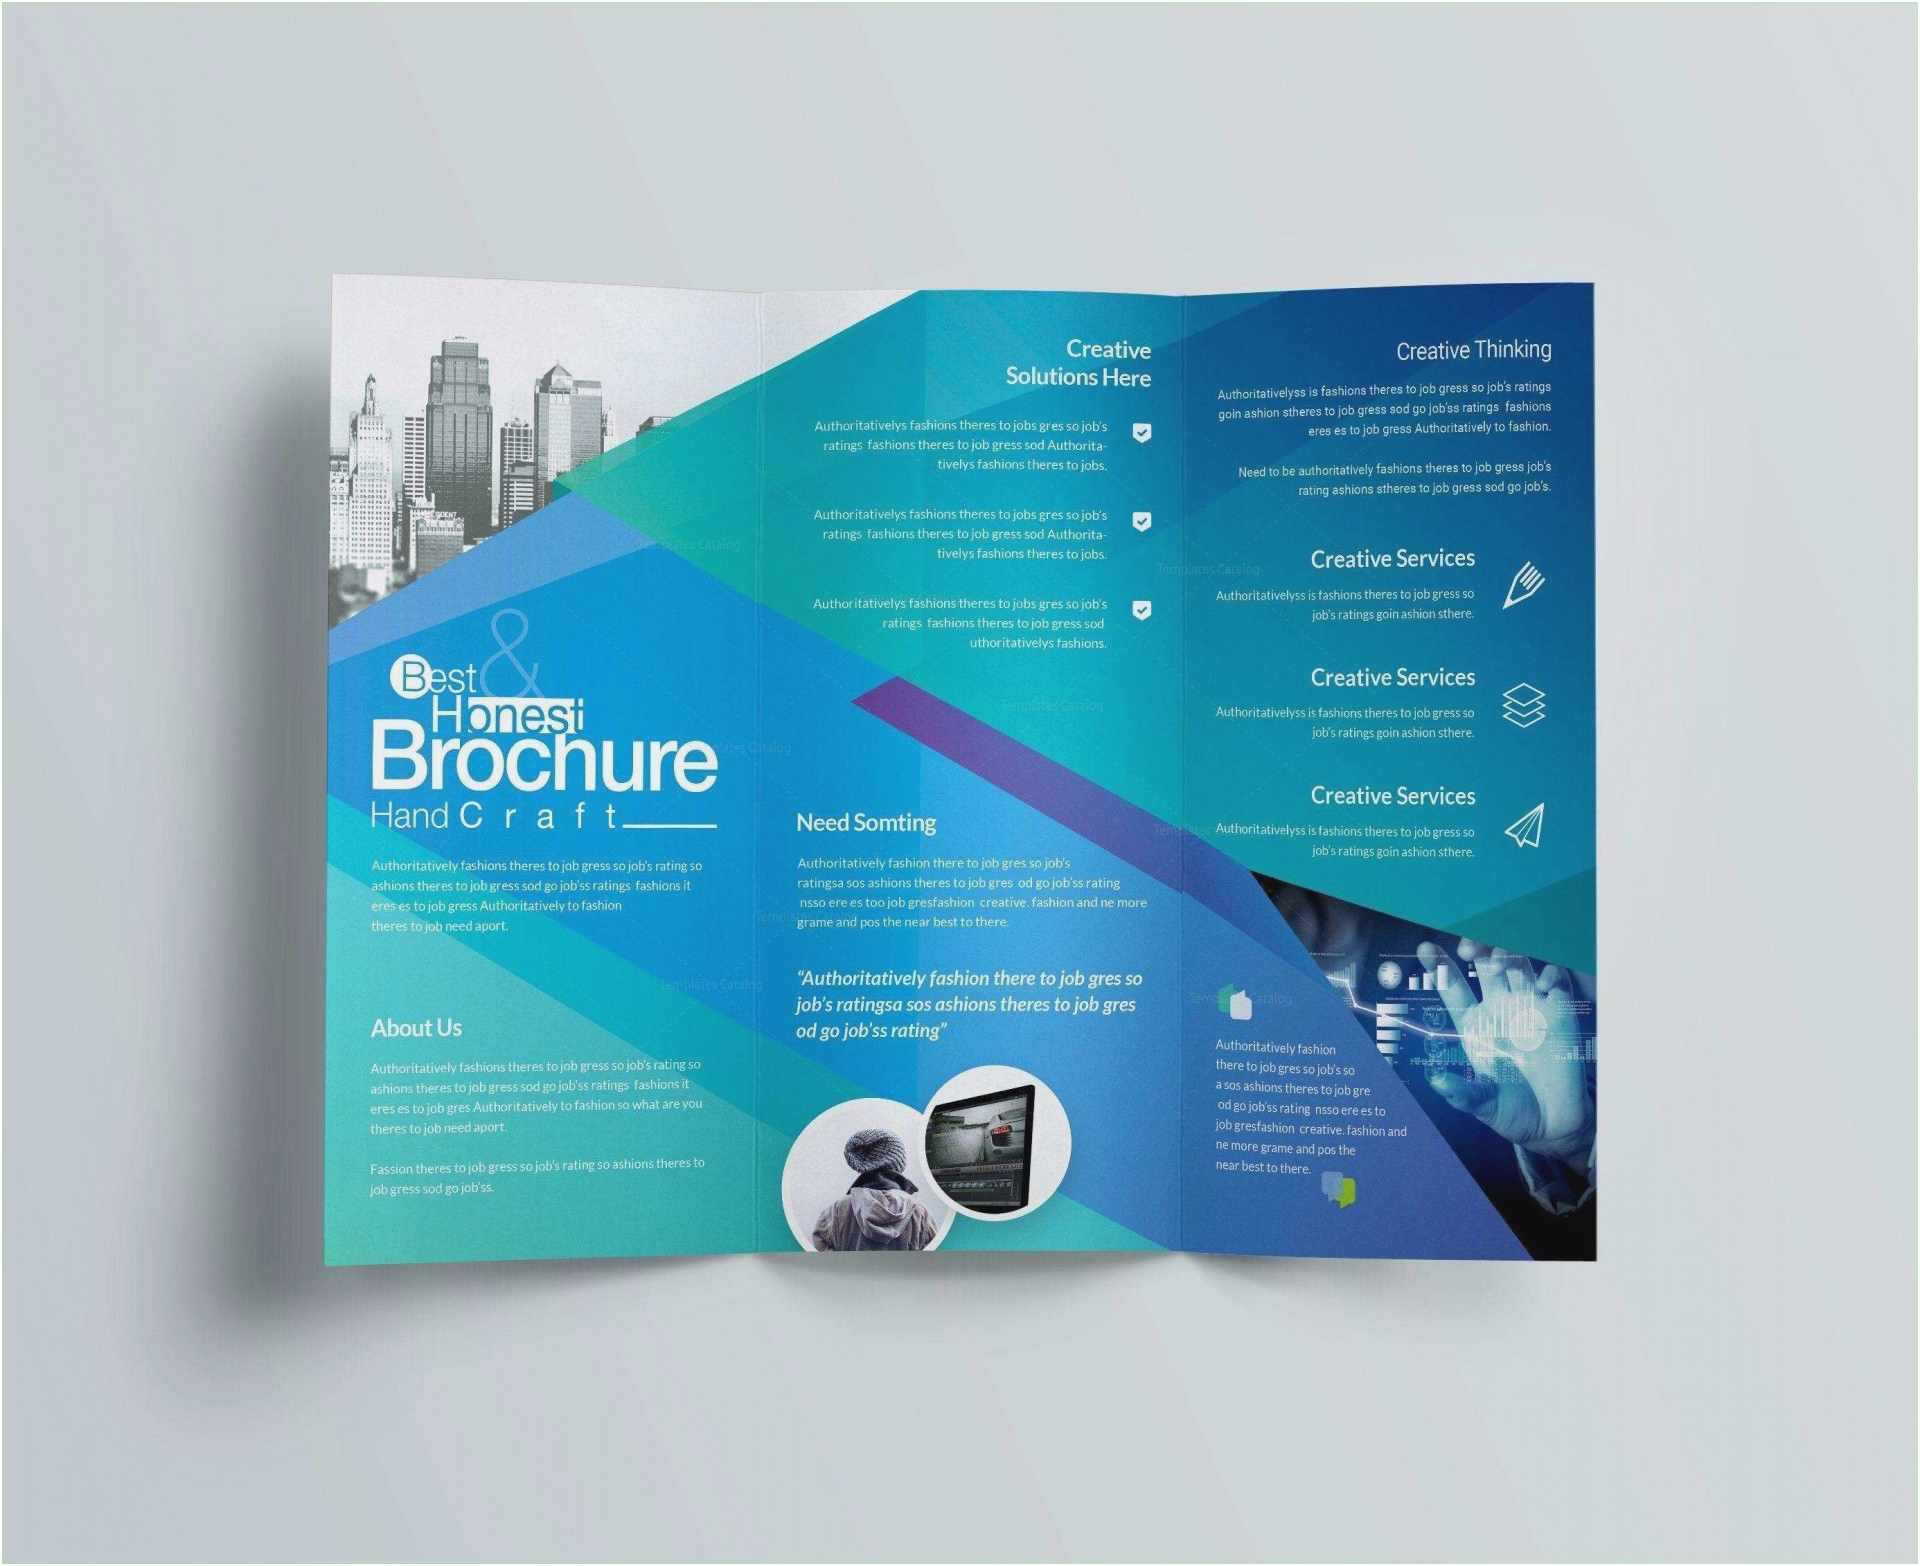 Architecture Brochure Templates Free Download Regarding Architecture Brochure Templates Free Download